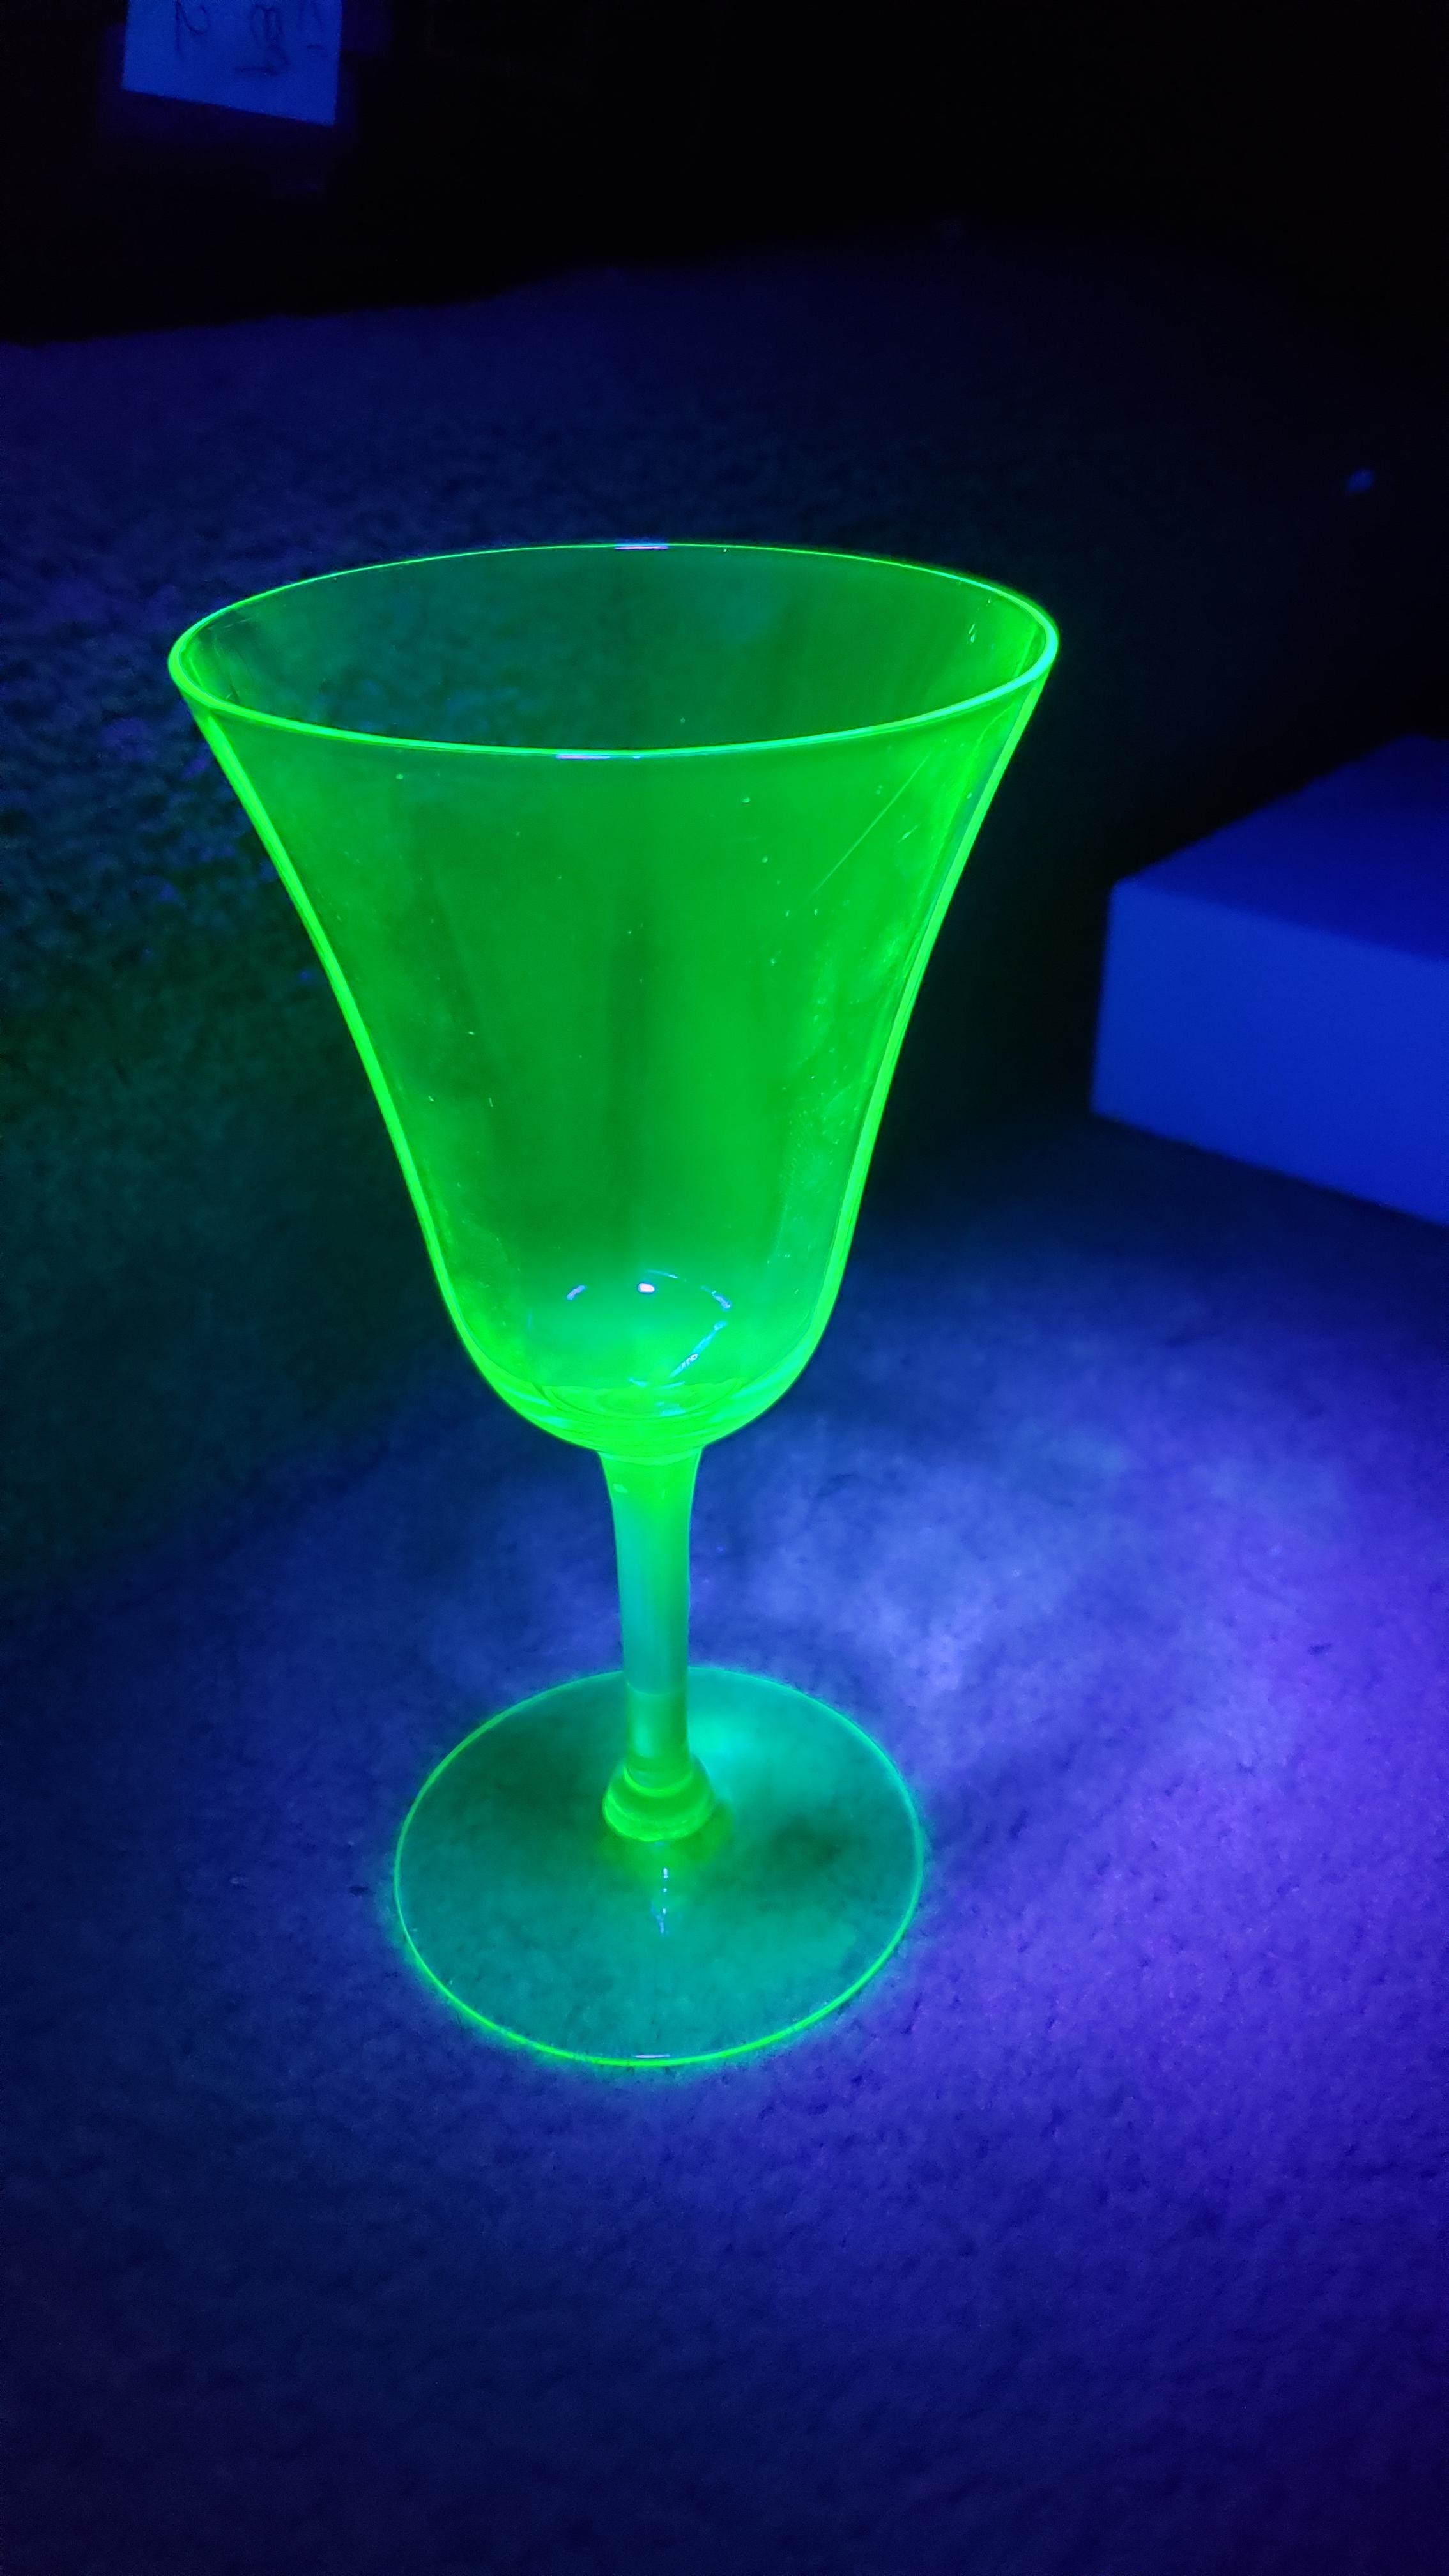 A luminescent glass with a stem